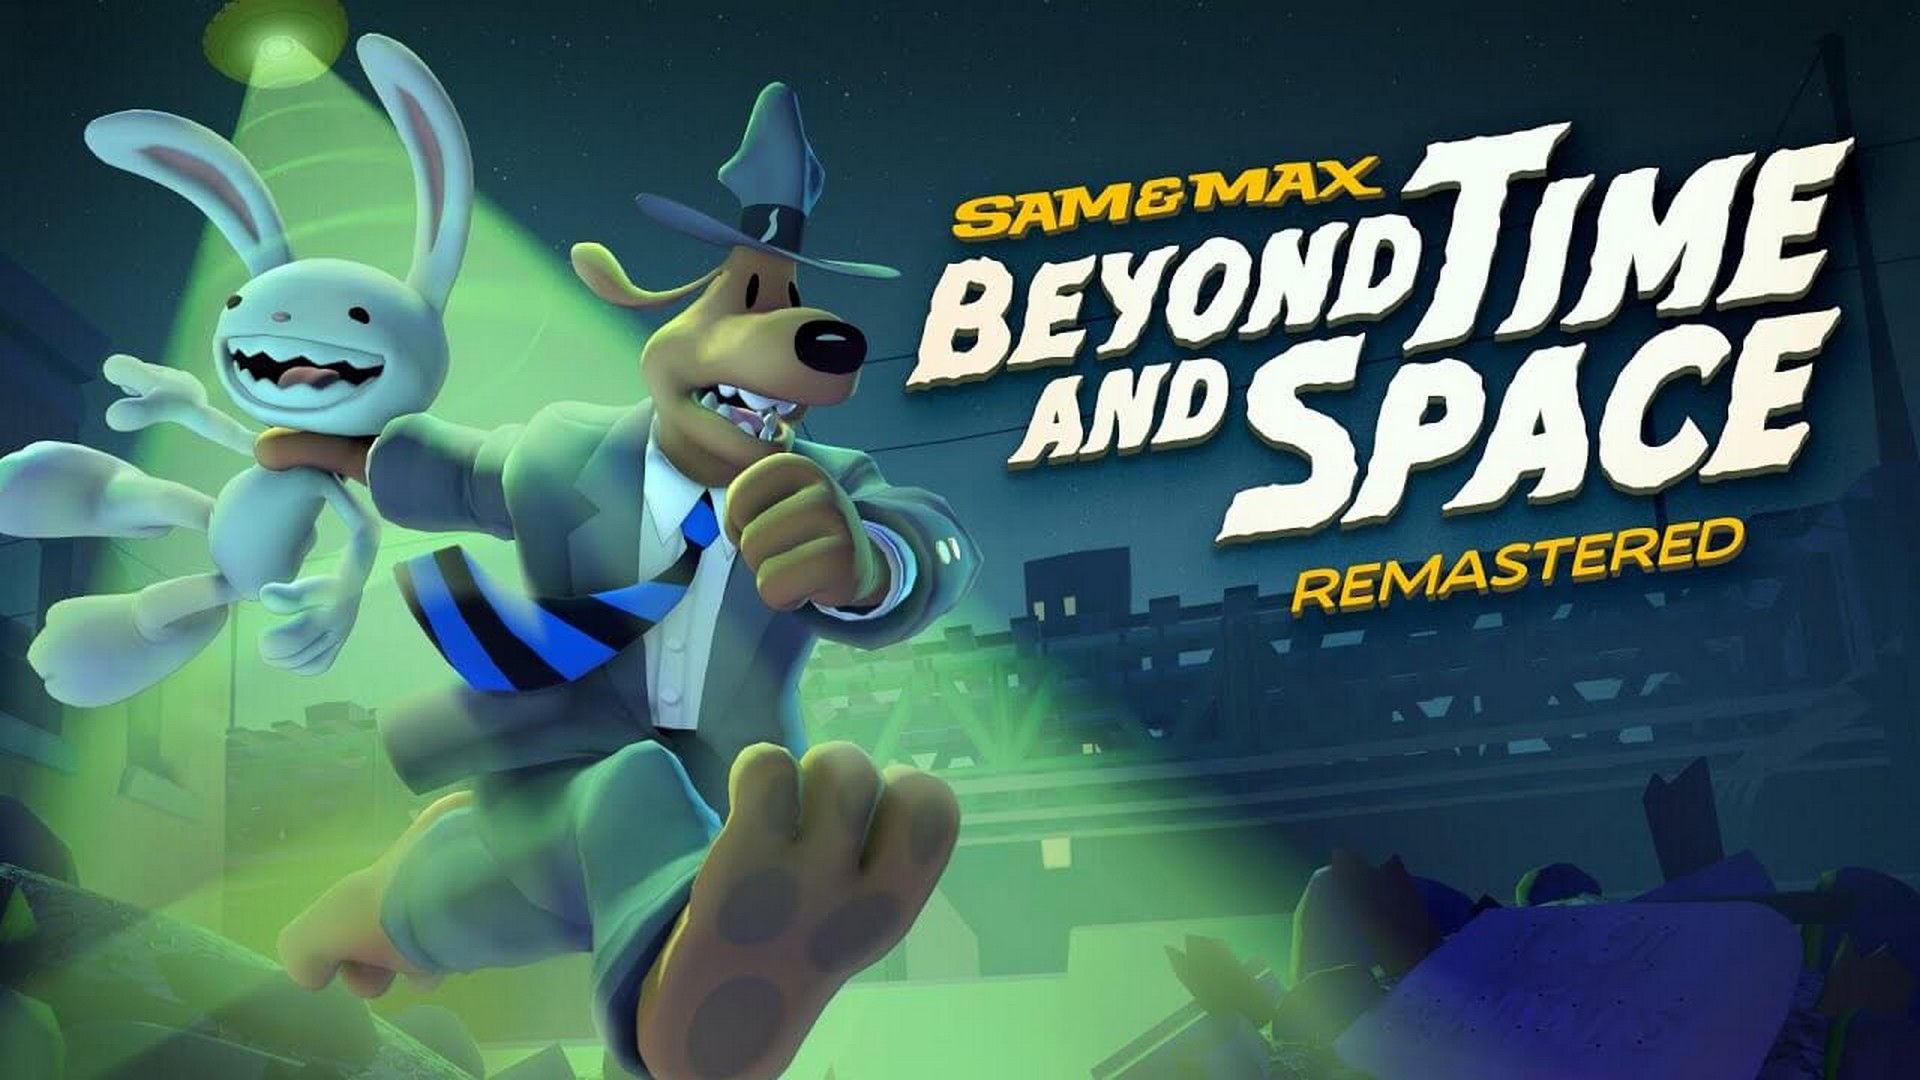 Sam & Max: Beyond Time and Space Now Available On GOG